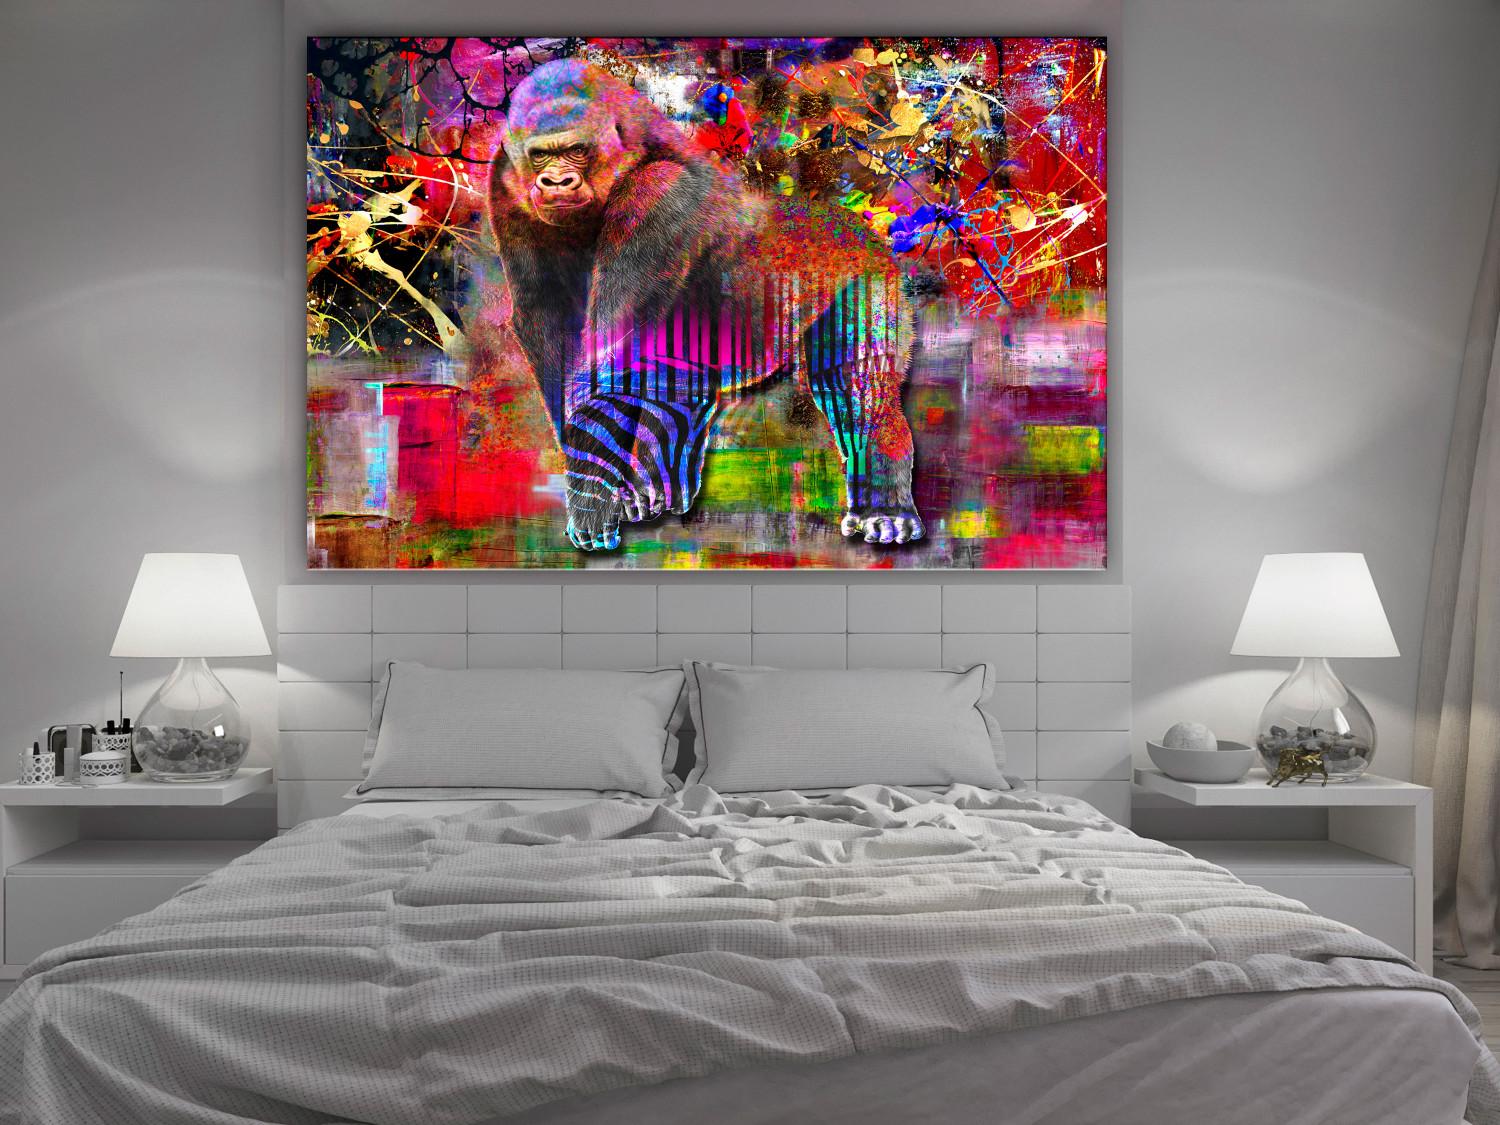 Canvas King of Tall Forests (1-piece) - monkey and colorful abstraction in the background